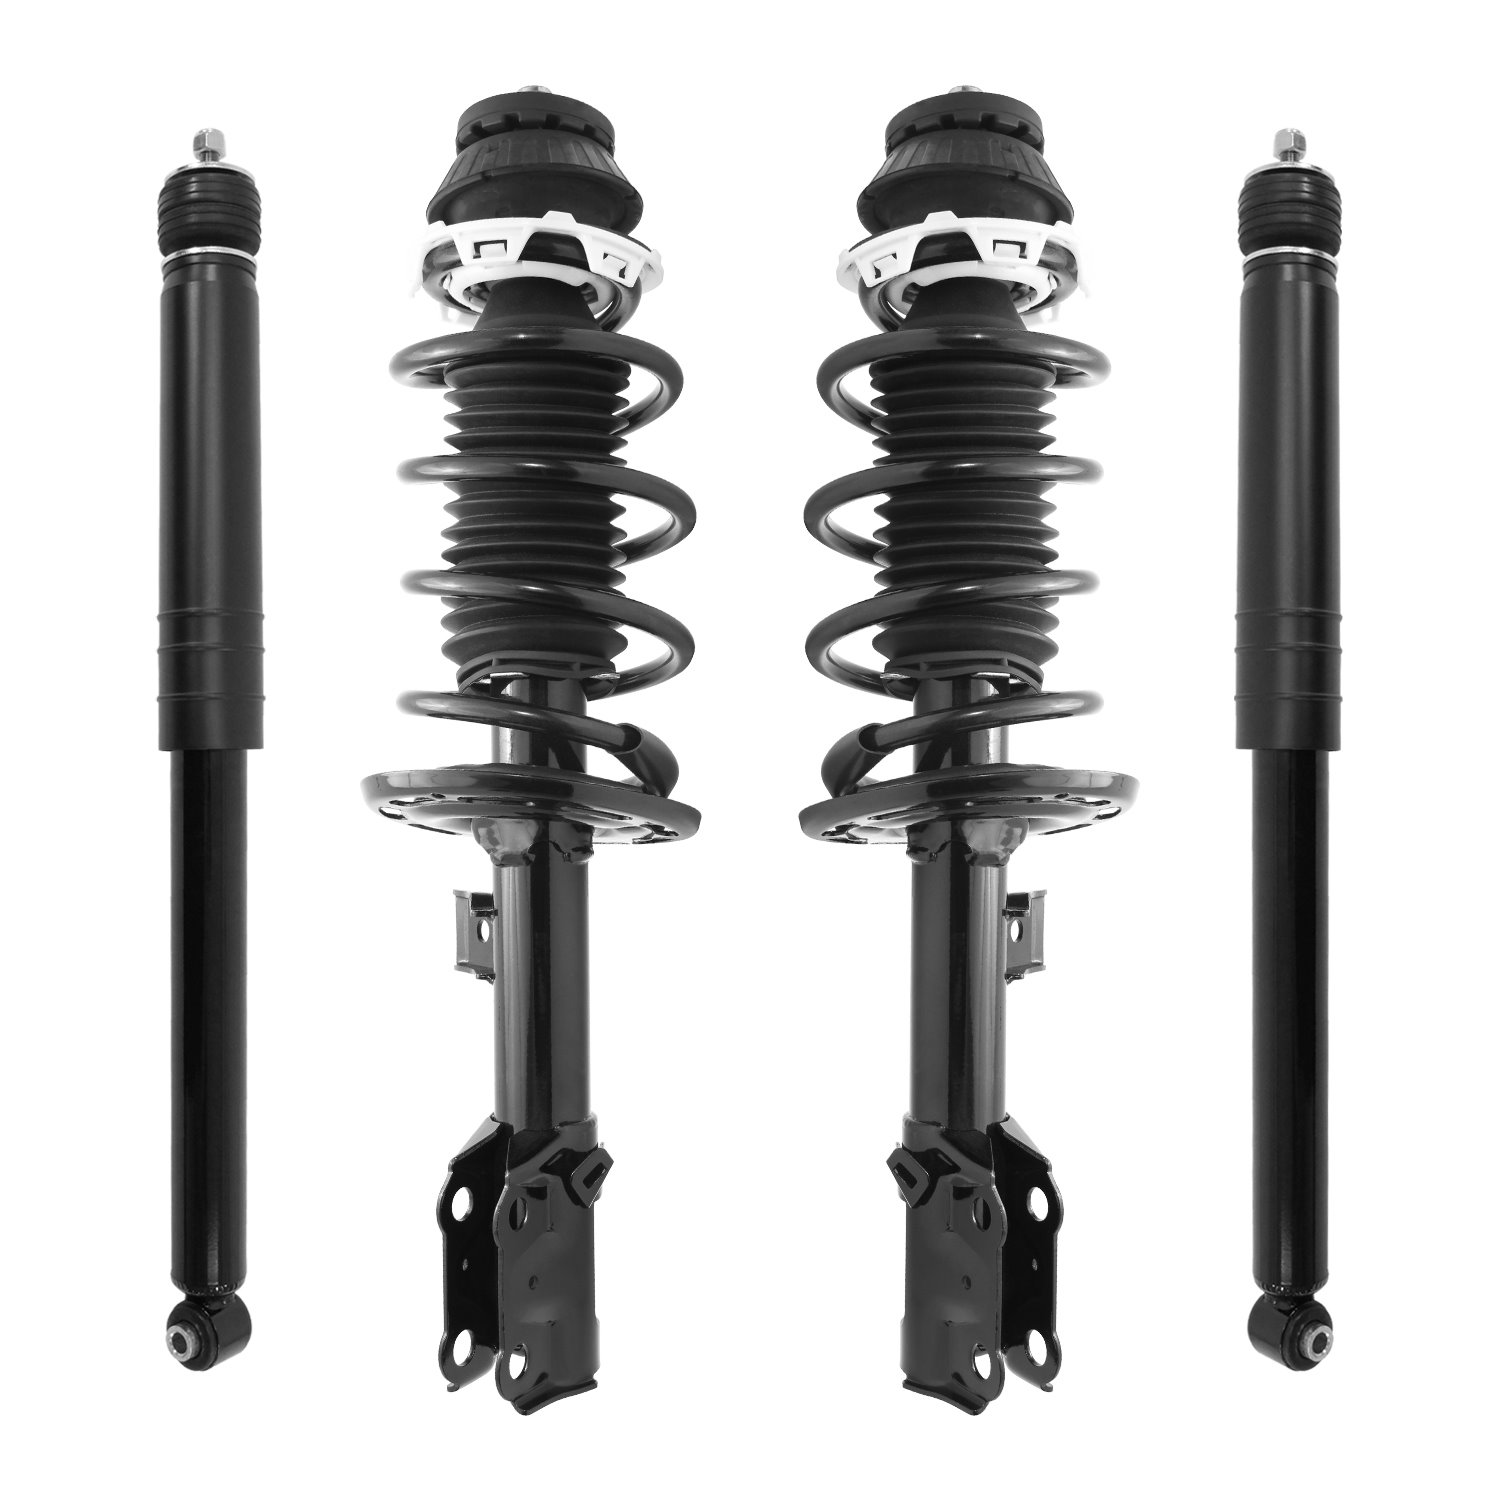 4-11411-250060-001 Front & Rear Suspension Strut & Coil Spring Assembly Fits Select Honda Fit